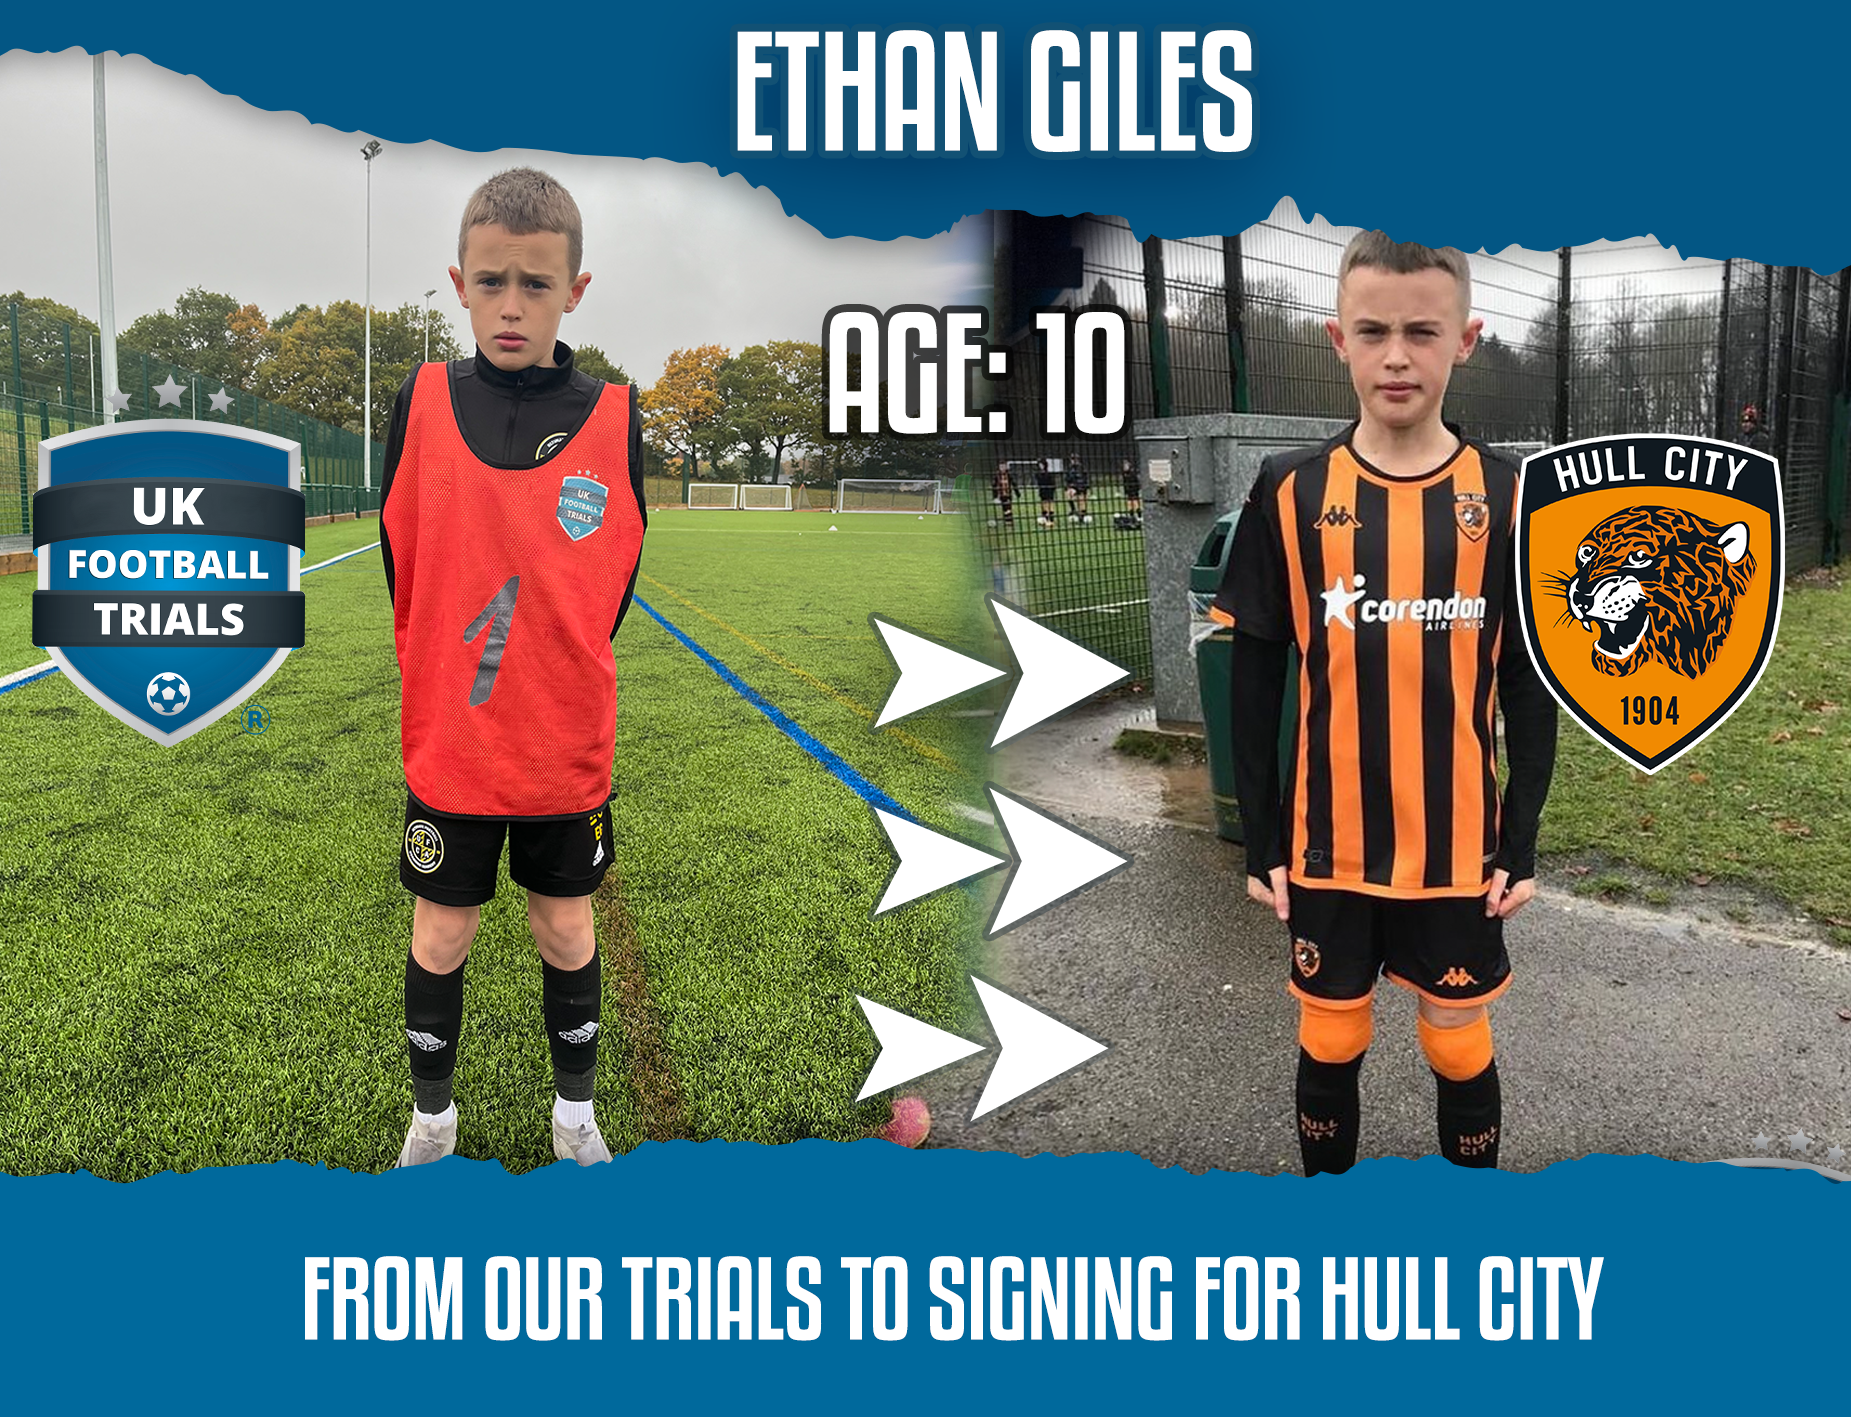 Ethan Giles - Aged 10 - Signed for Hull City